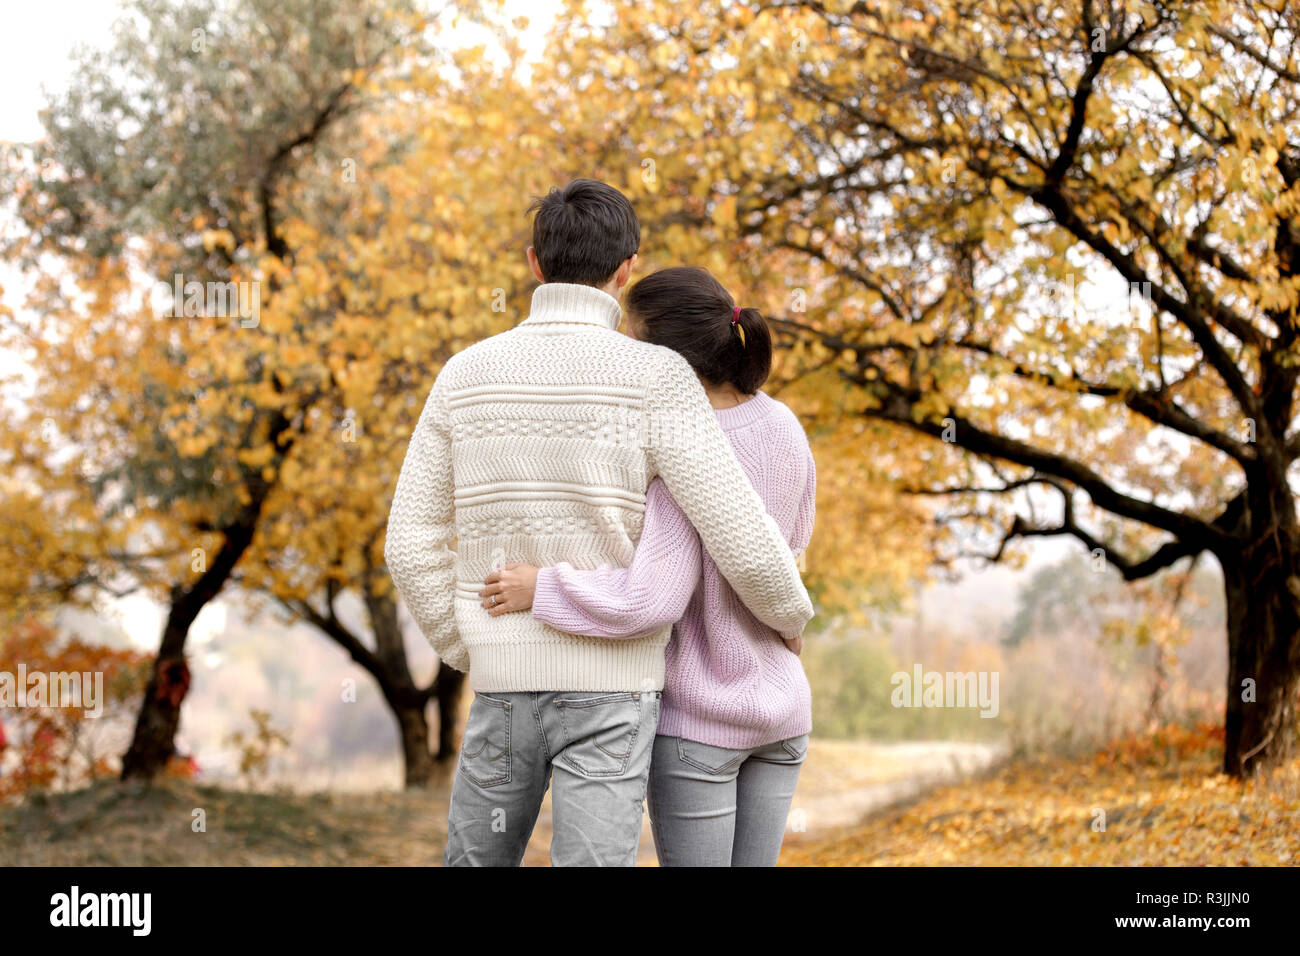 Couple in love in the autumn leaves Stock Photo